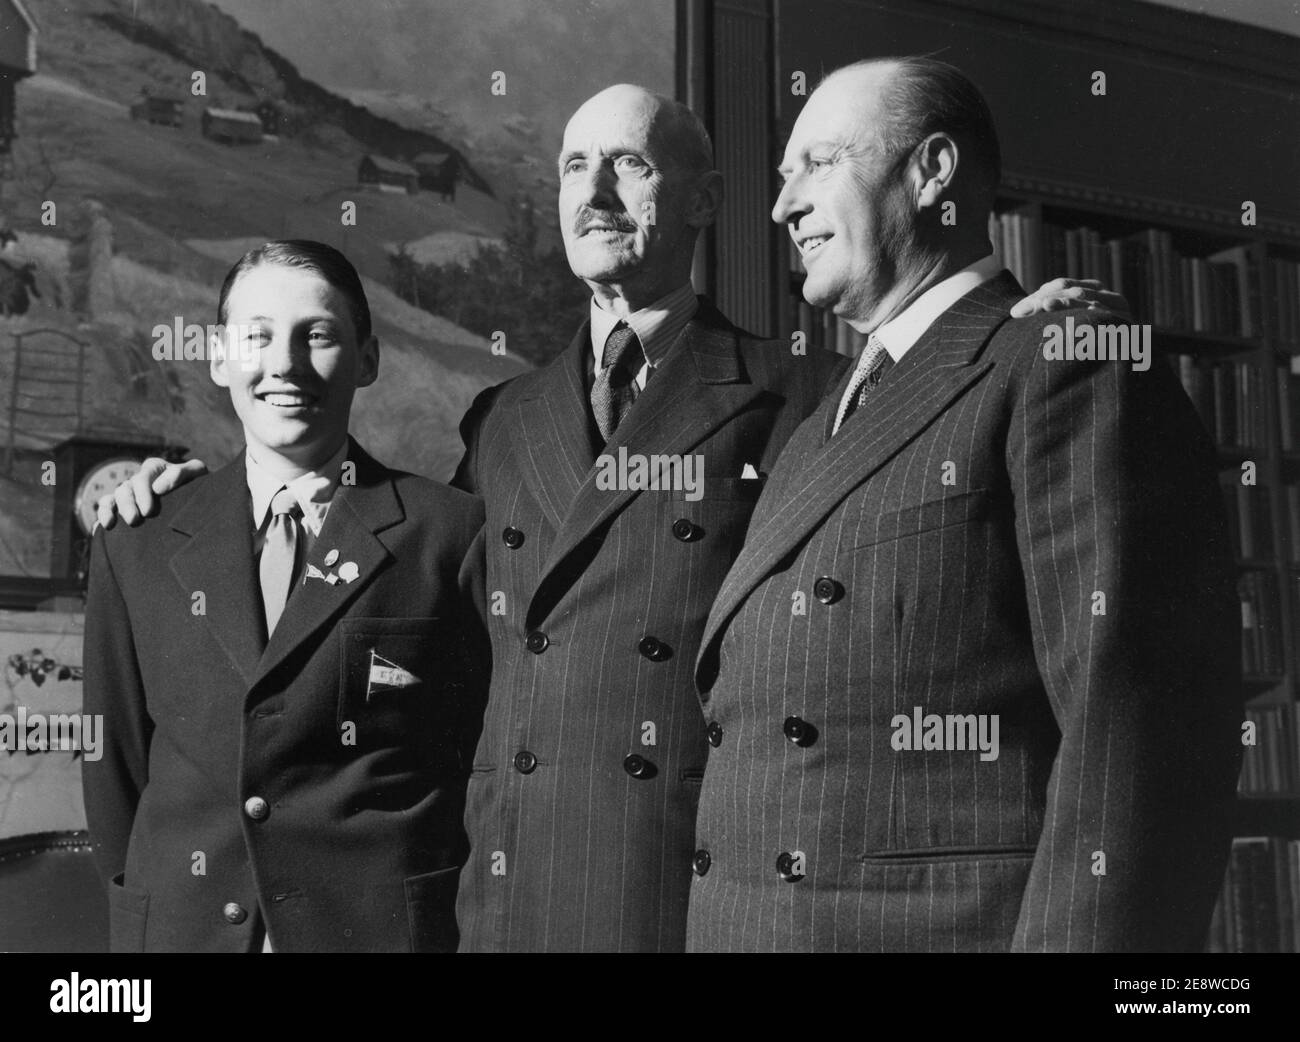 Norwegian royalty. Crown prince Harald with his father Olav V with king Haakon in the middle on may 7 1950. Three generations. Stock Photo